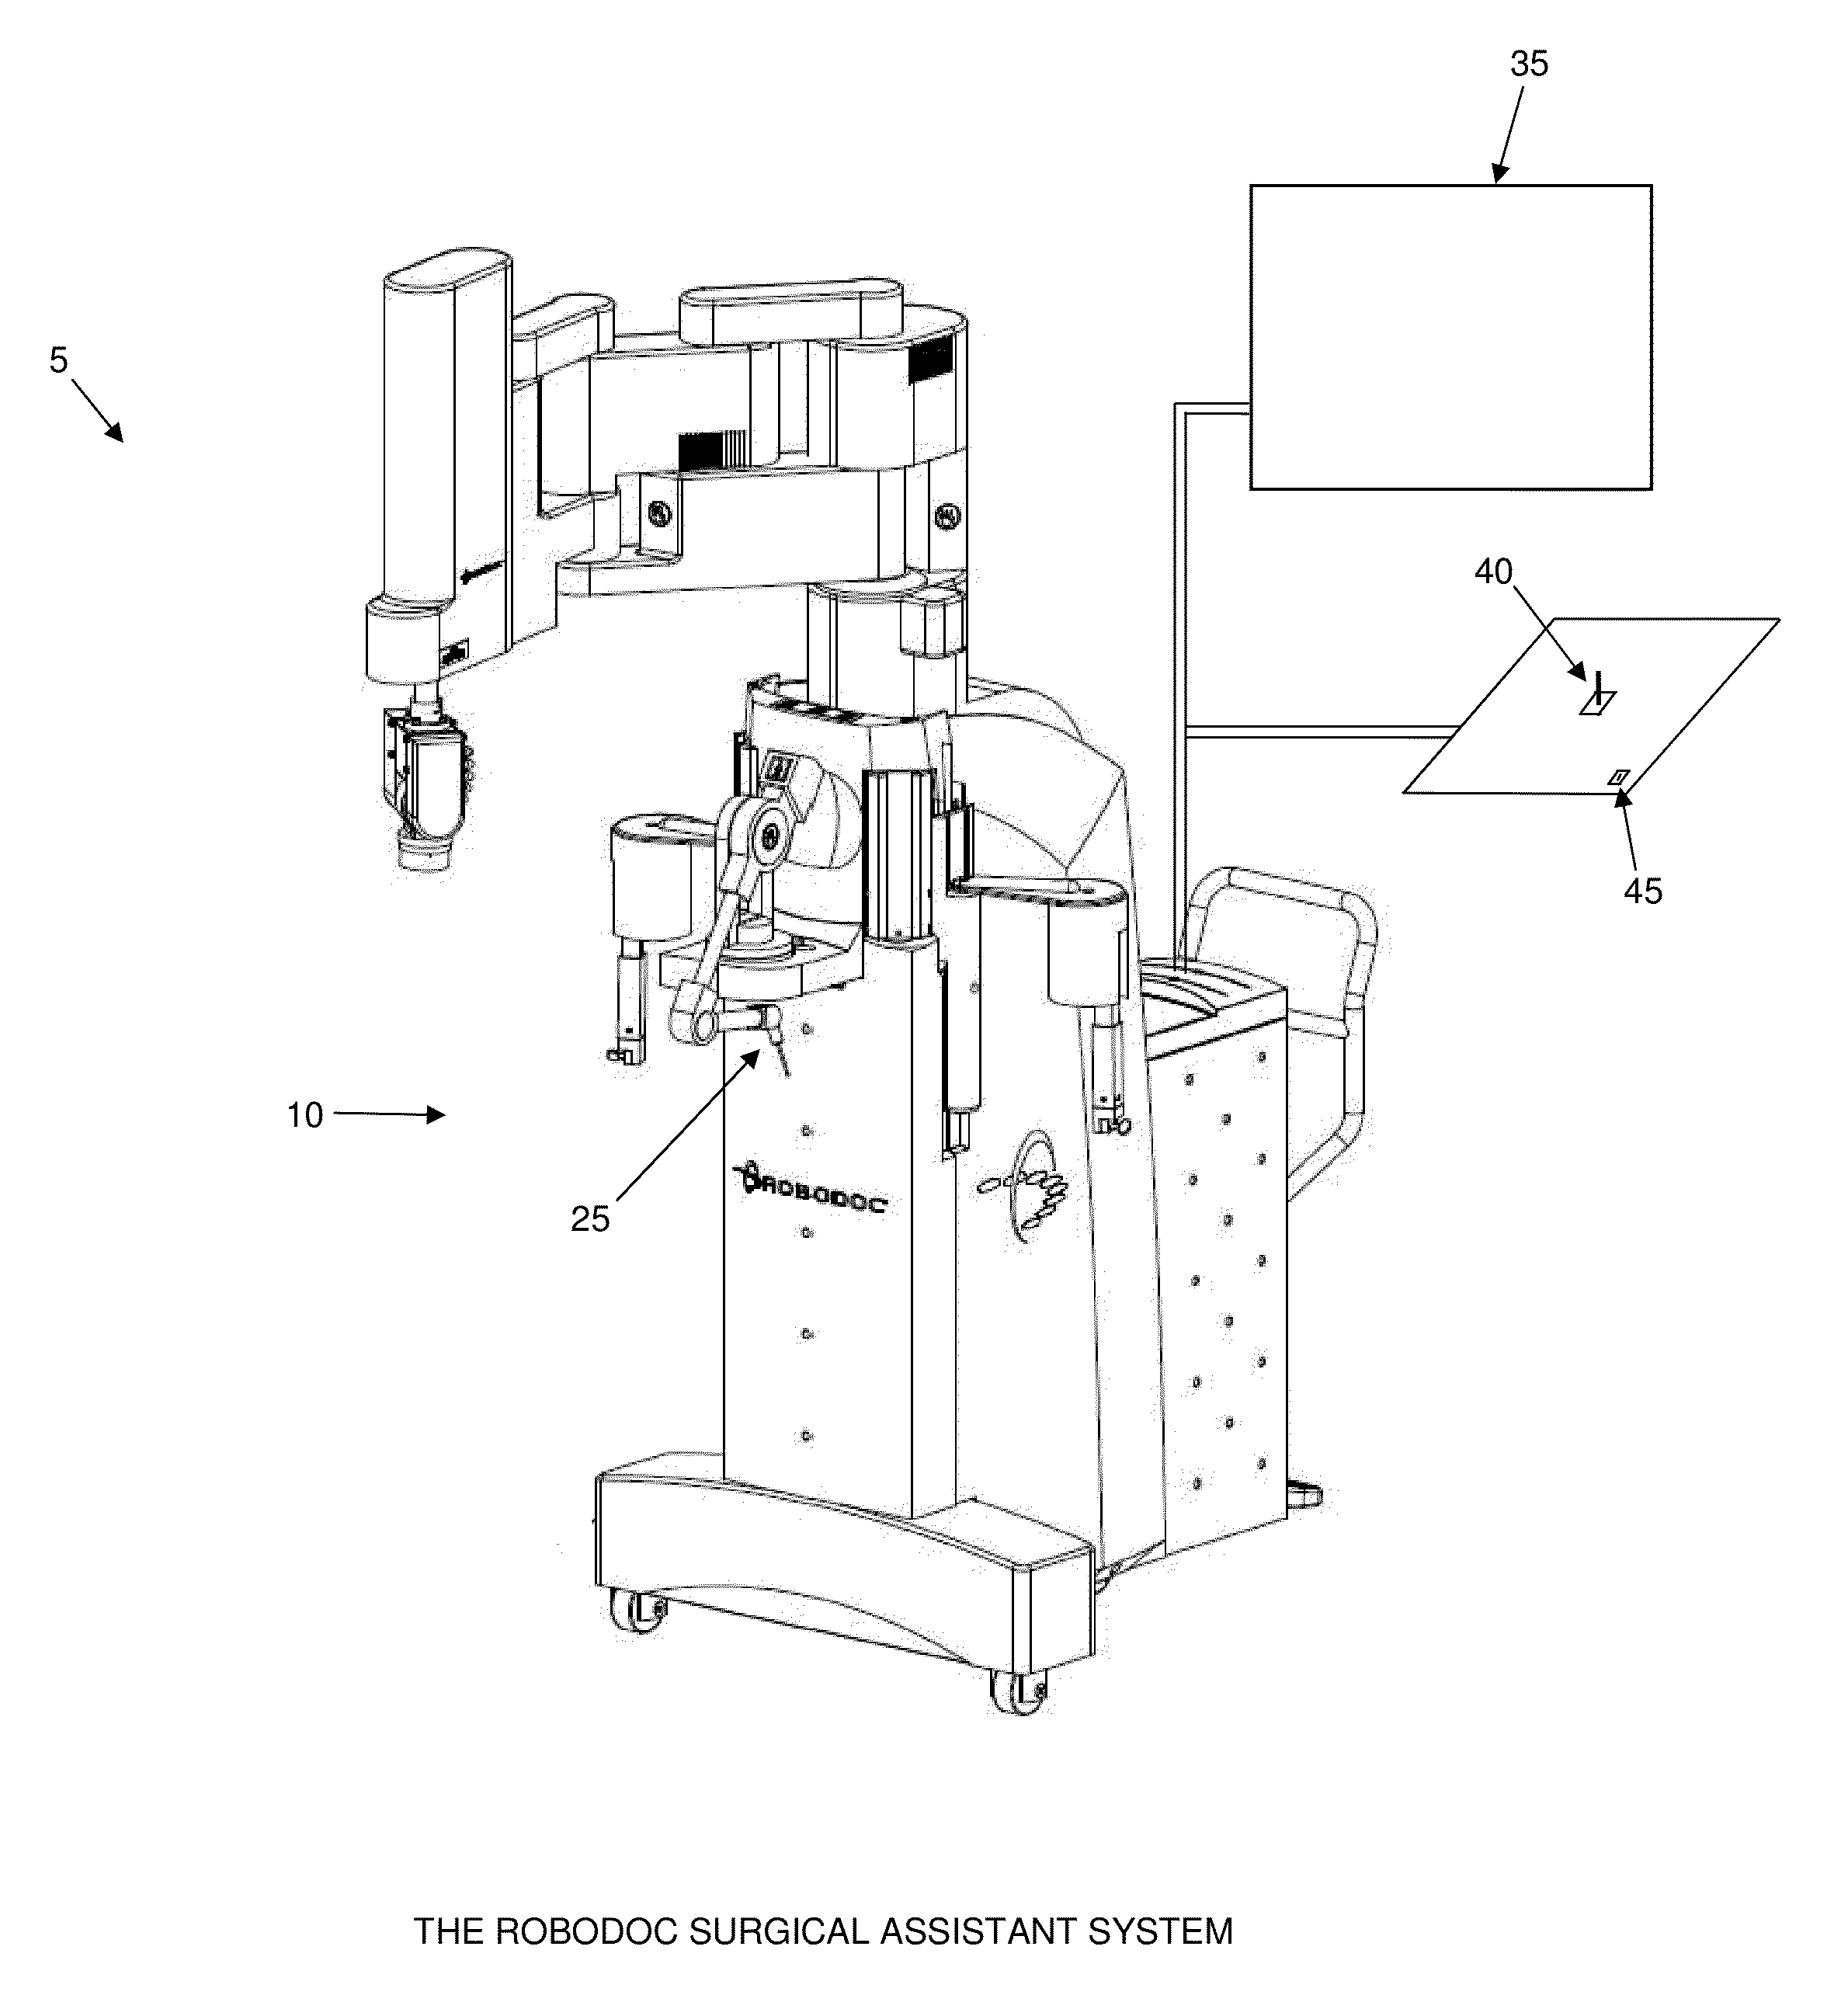 Method and apparatus for determining and guiding the toolpath of an orthopedic surgical robot